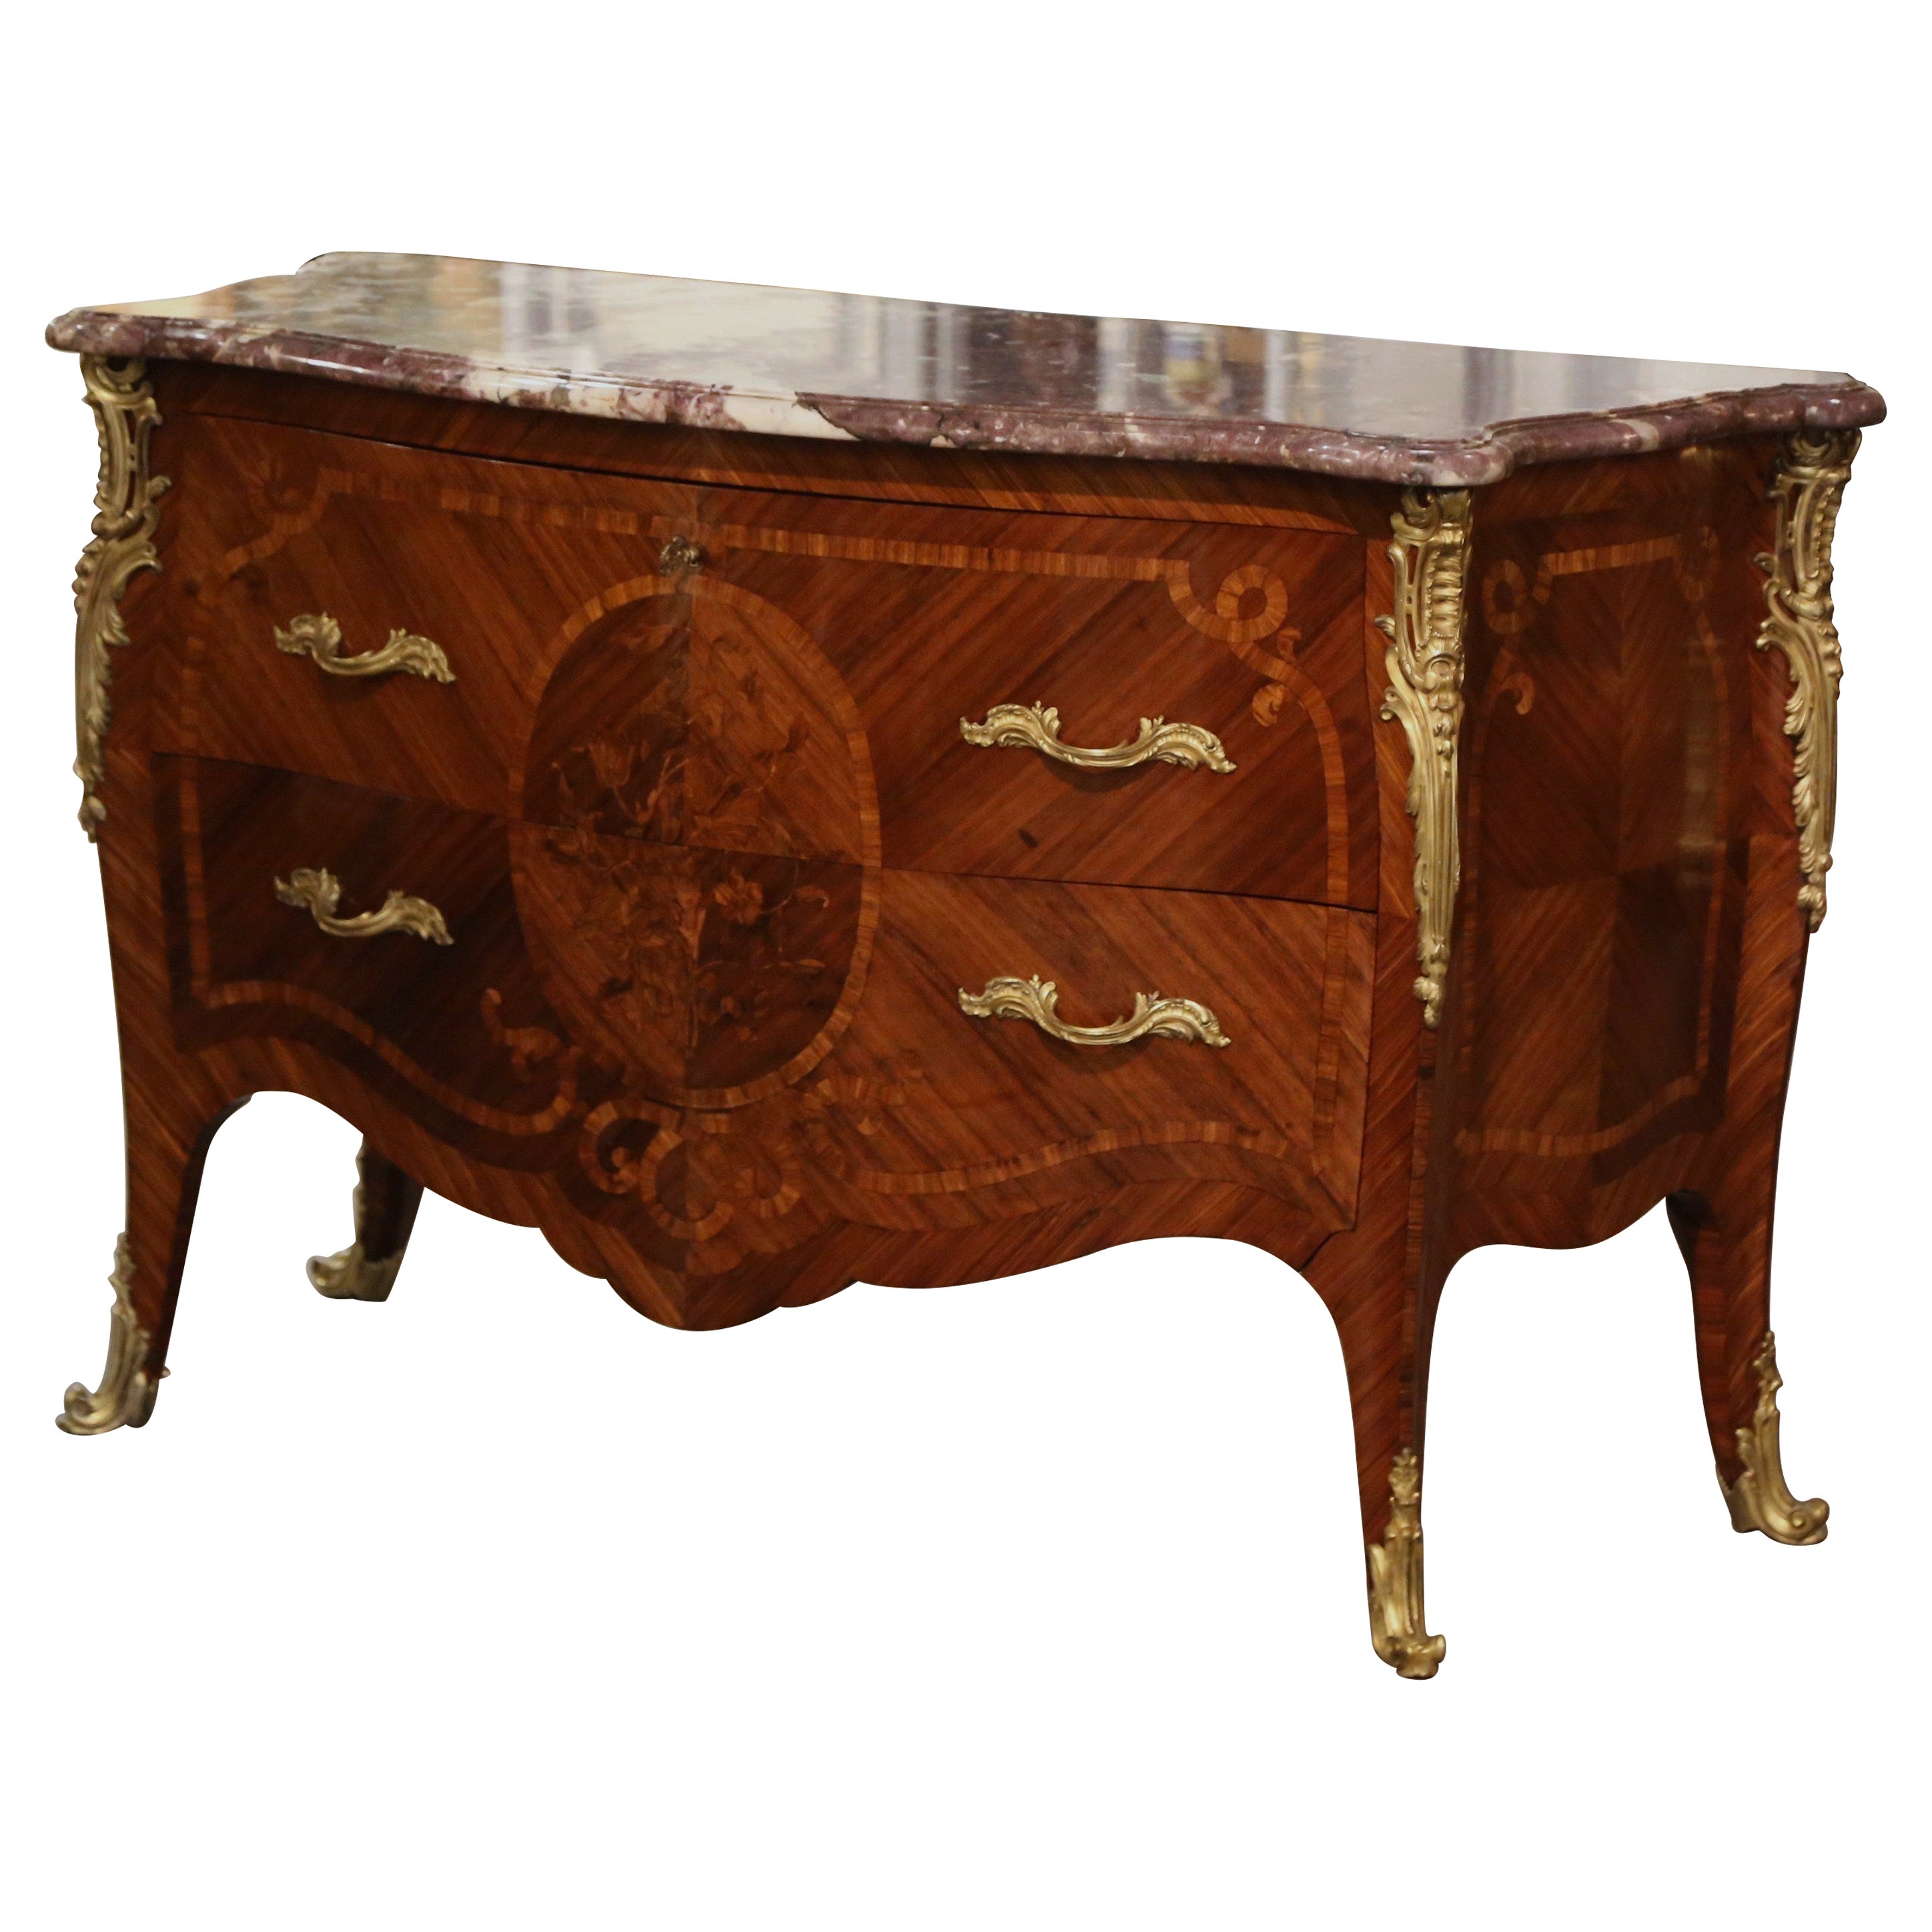 Early 20th Century Louis XV Marble Top Marquetry & Ormolu Bombe Chest of Drawers For Sale